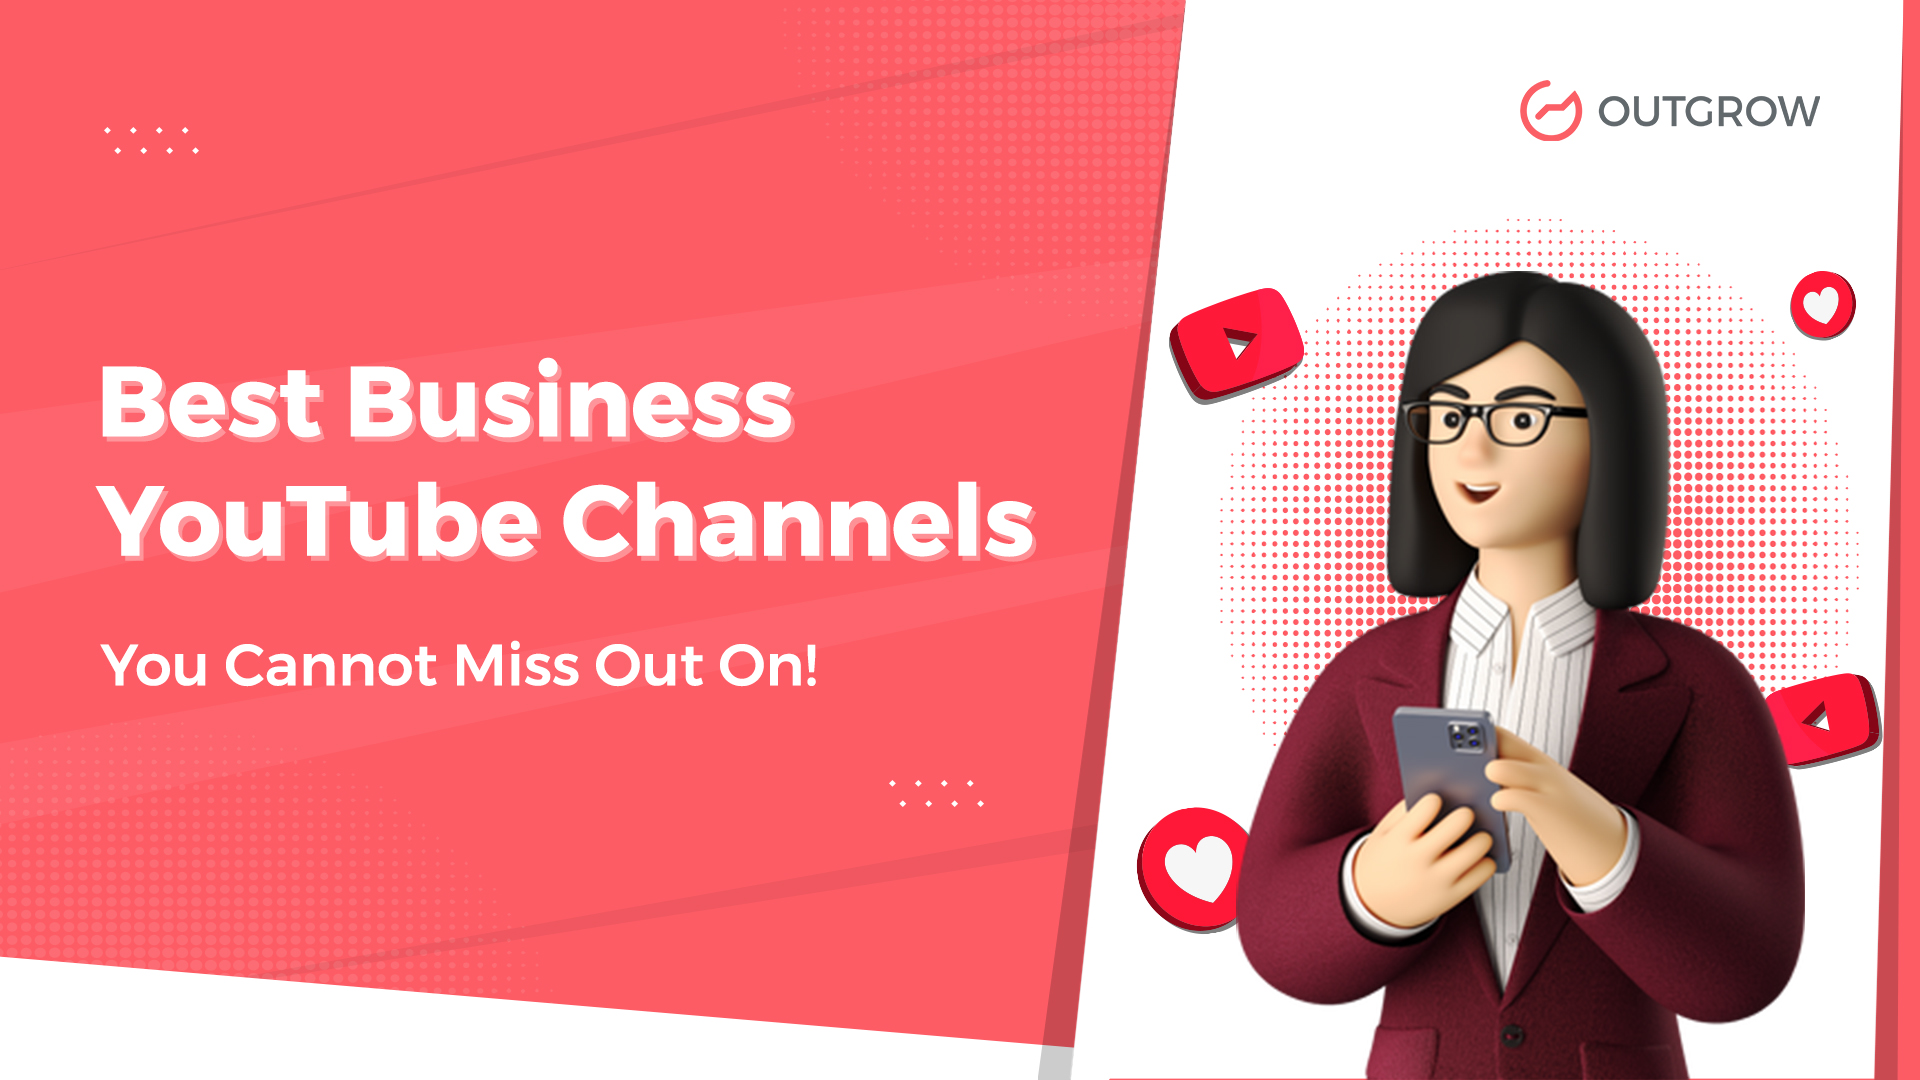 Best Business YouTube Channels